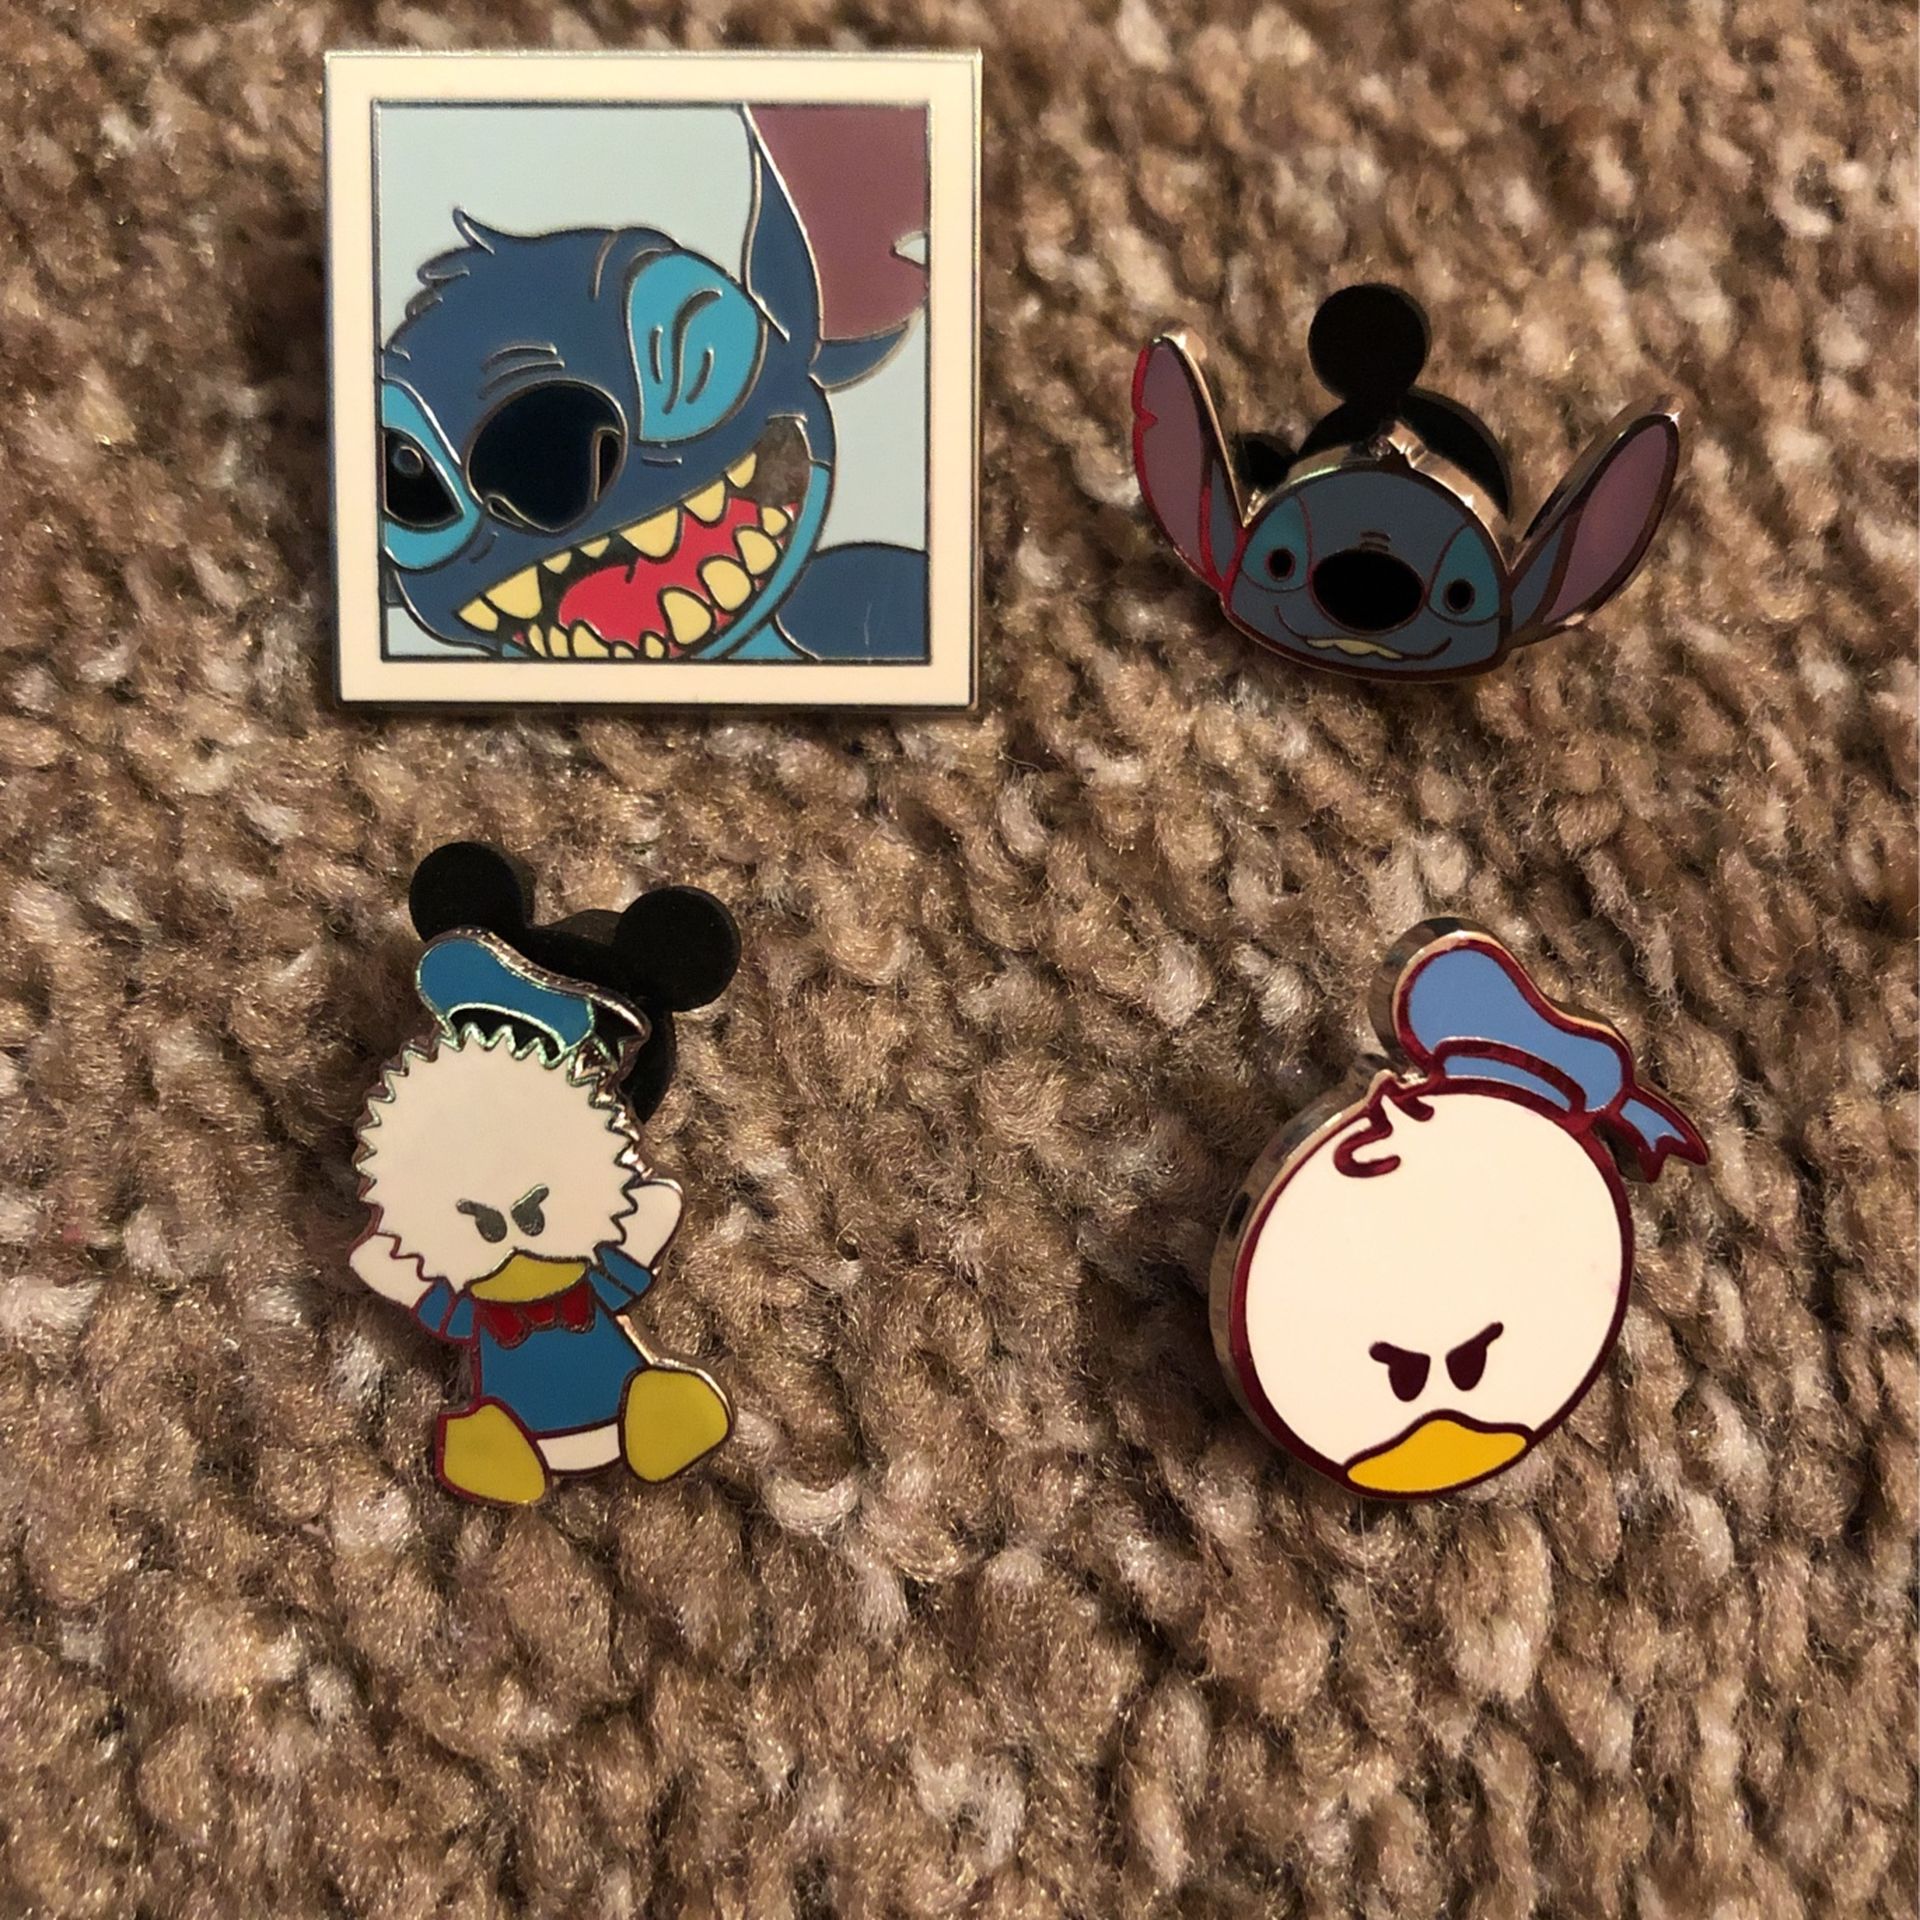 Disney Trading Pins, Stitch And Donald Duck Collectible Pins $10 Each